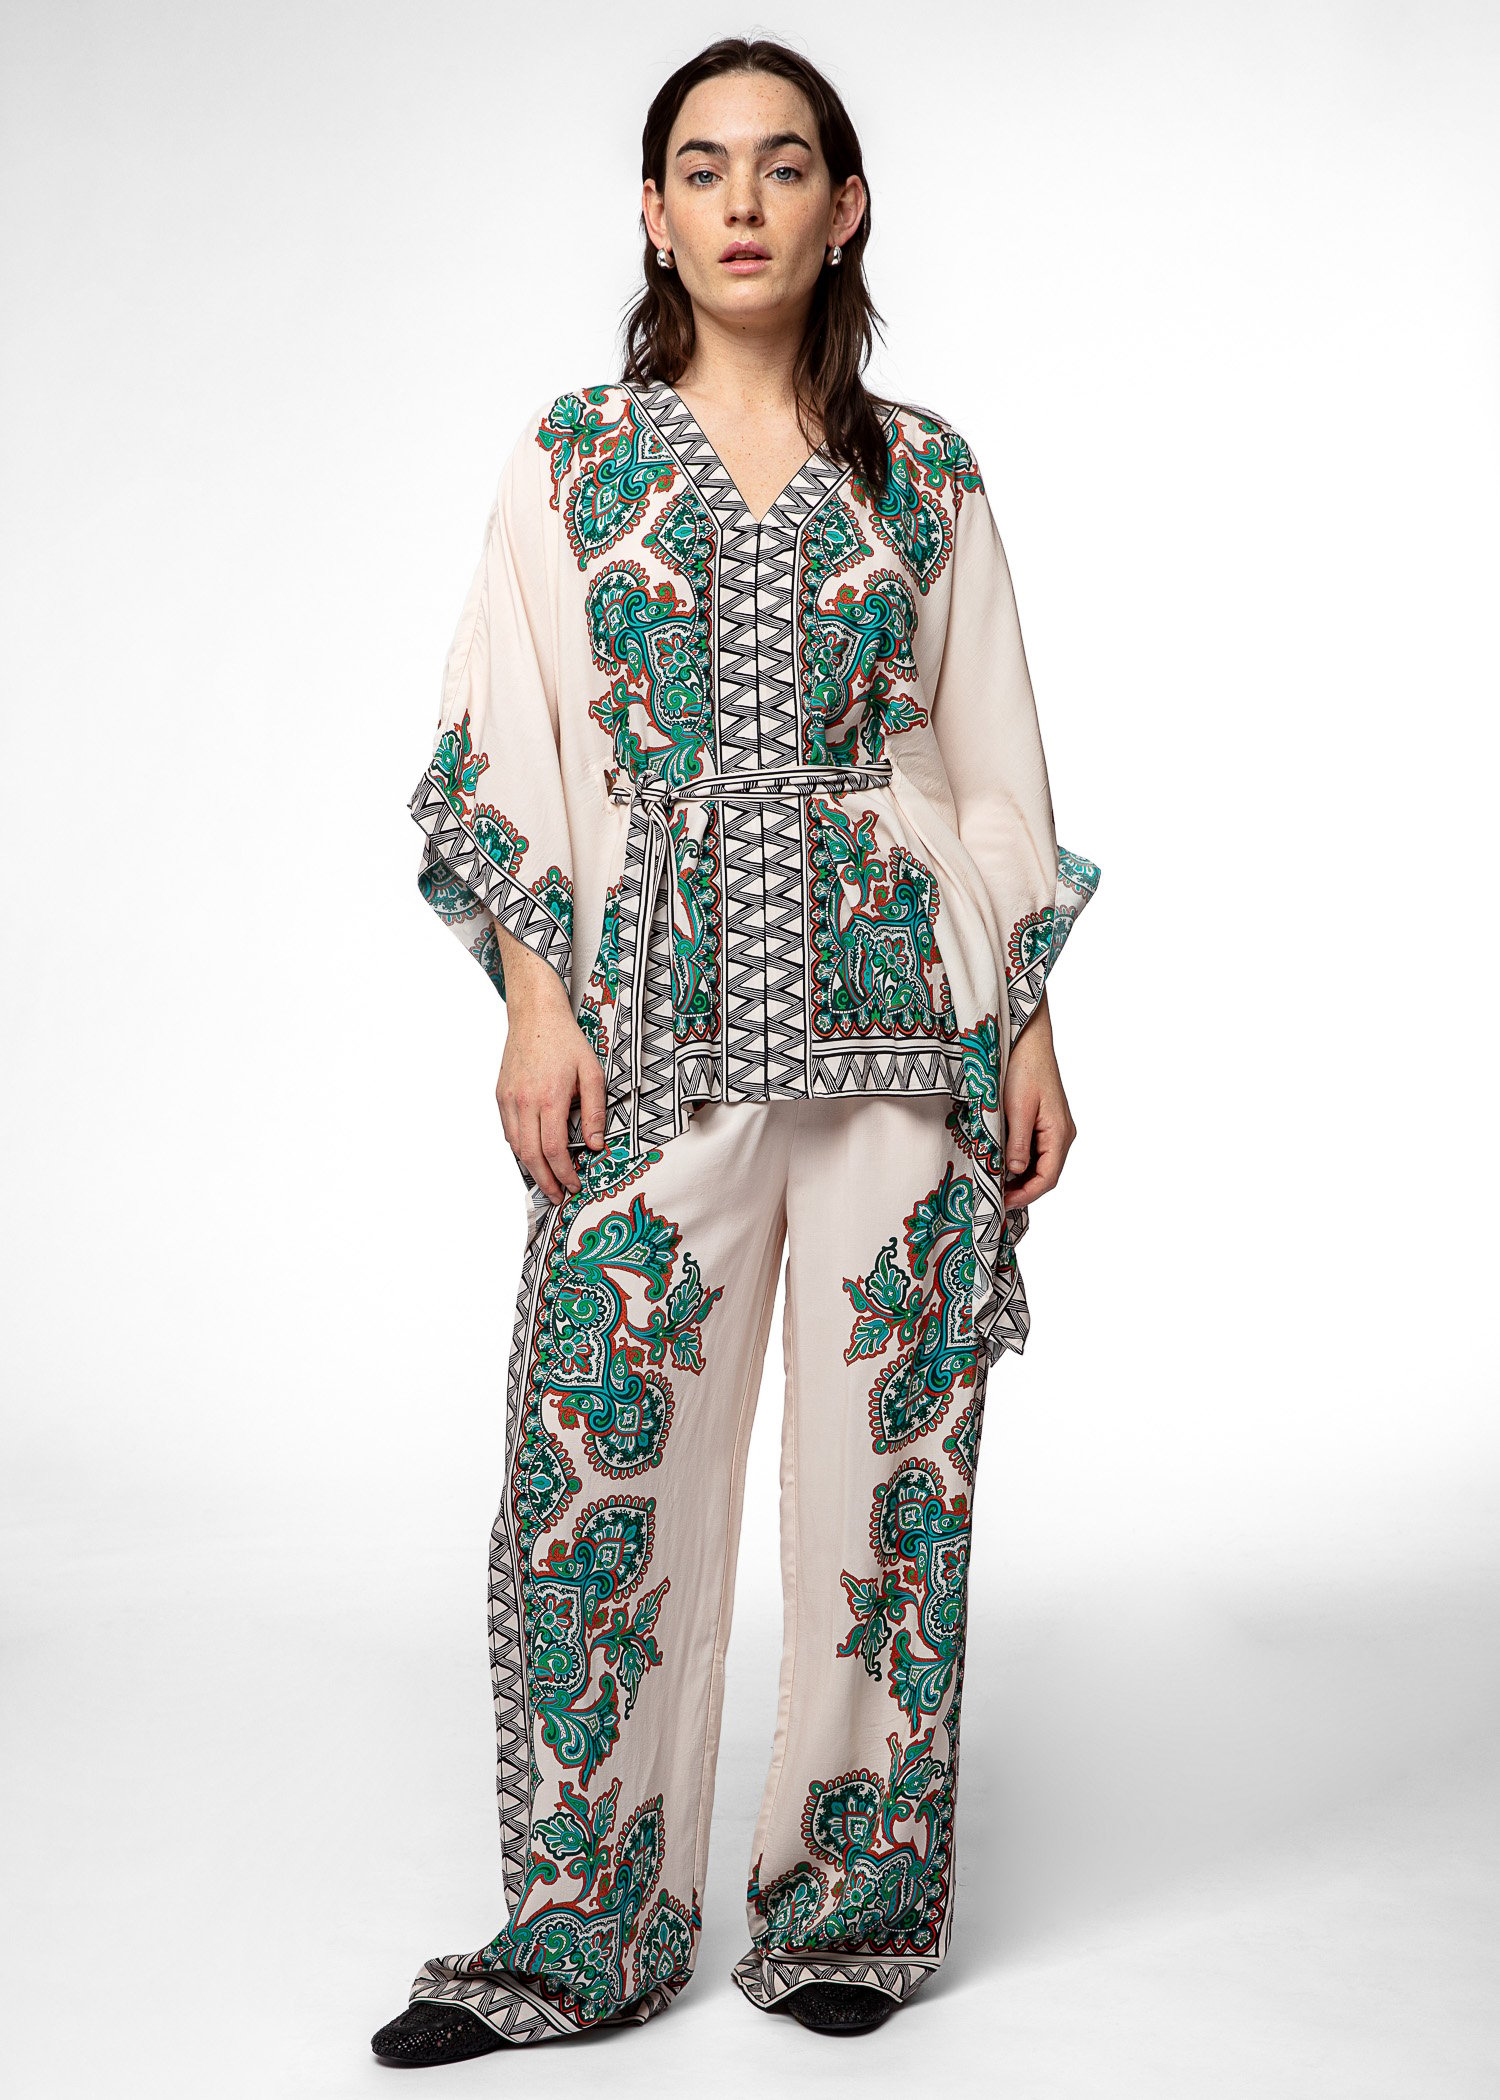 Paisley patterned pant